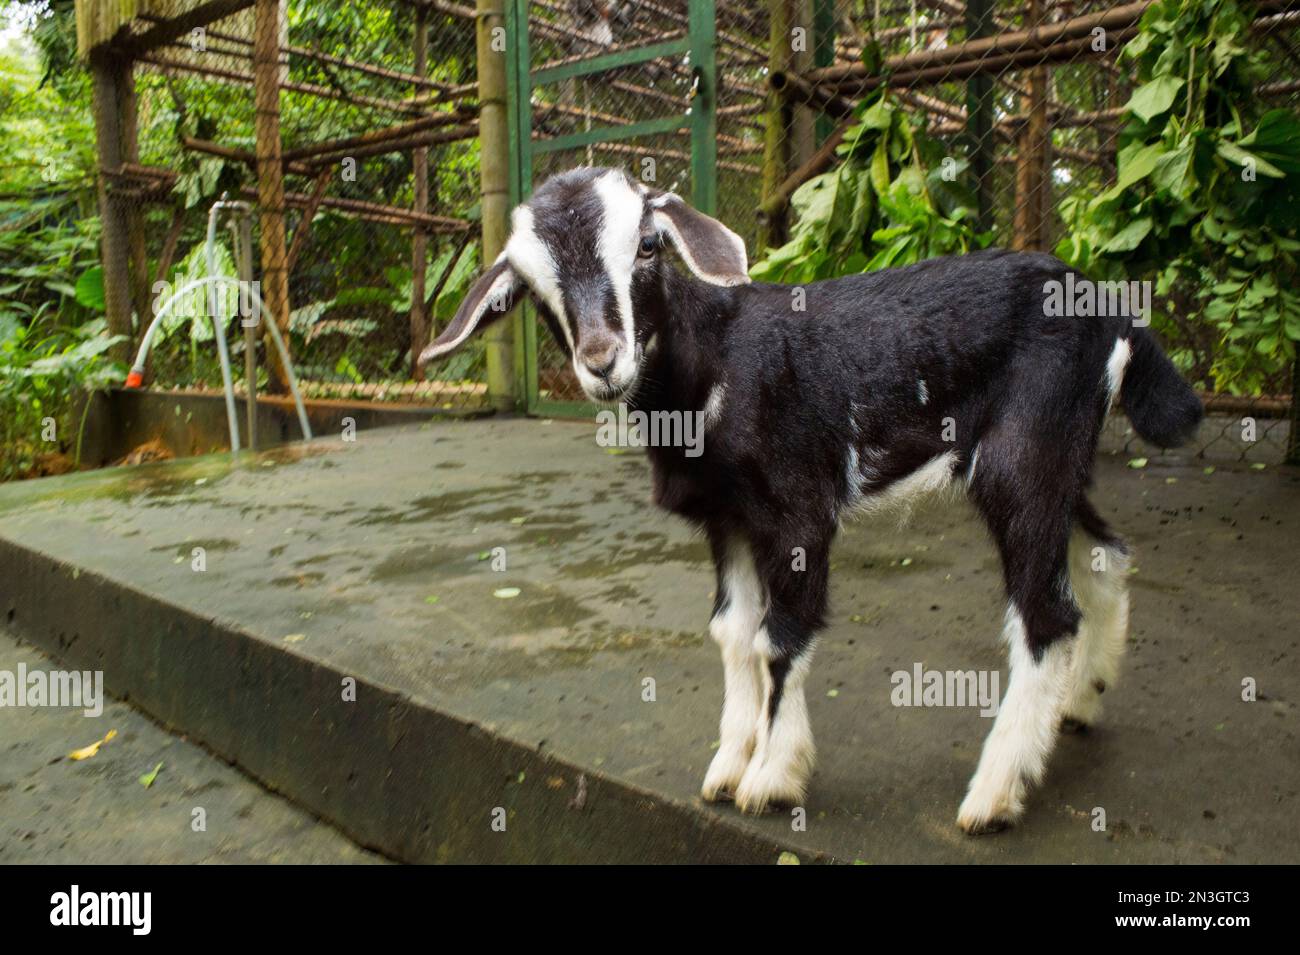 A kid goat (Capra aegagrus hircus) stands outside a caged area in Cuc Phuong National Park; Vietnam Stock Photo